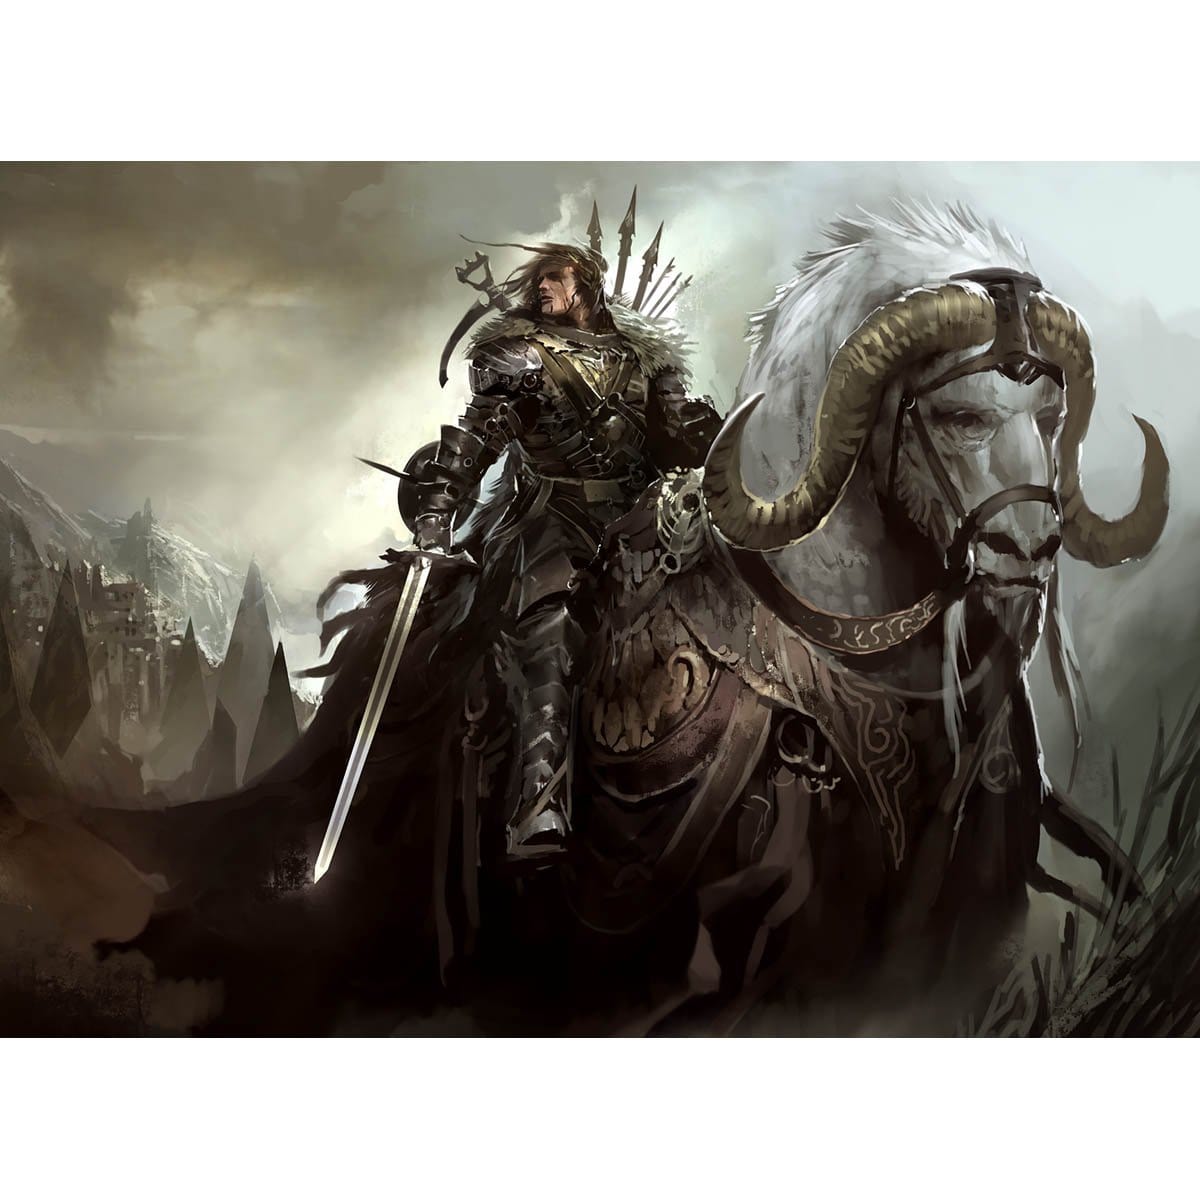 Ikiral Outrider Print - Print - Original Magic Art - Accessories for Magic the Gathering and other card games